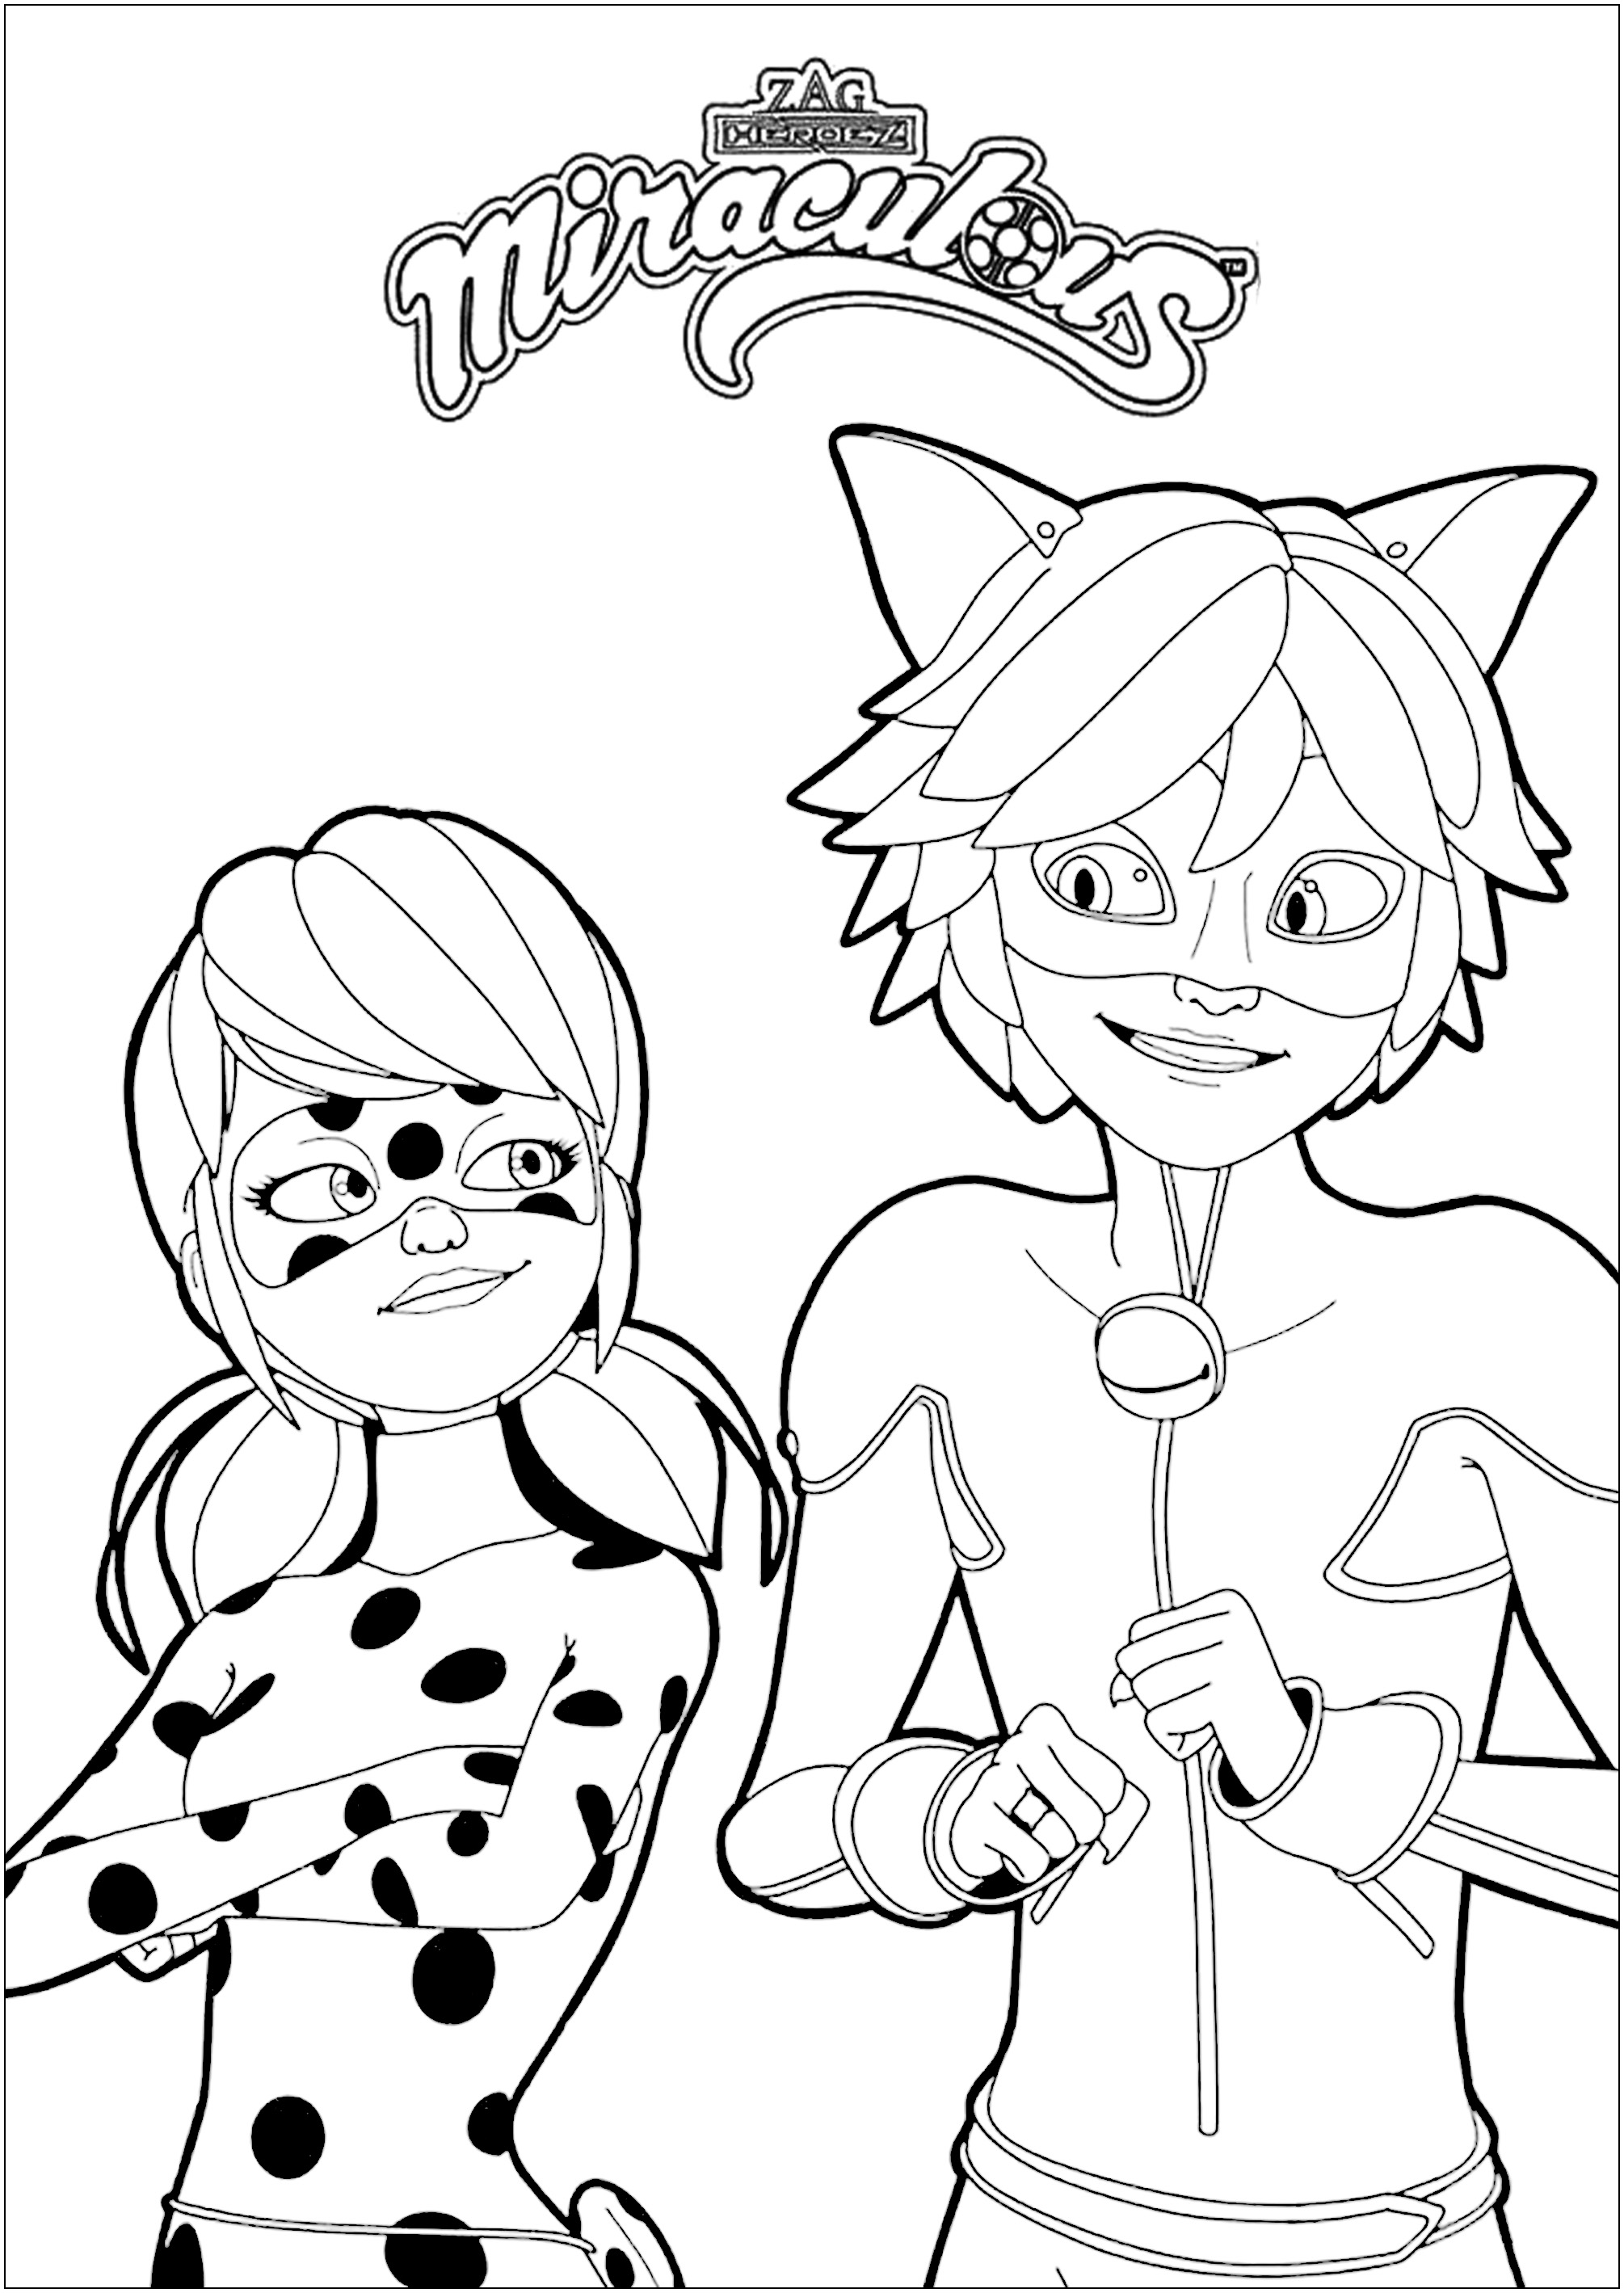 Lady bug / Miraculous : coloring pages for children Miraculous